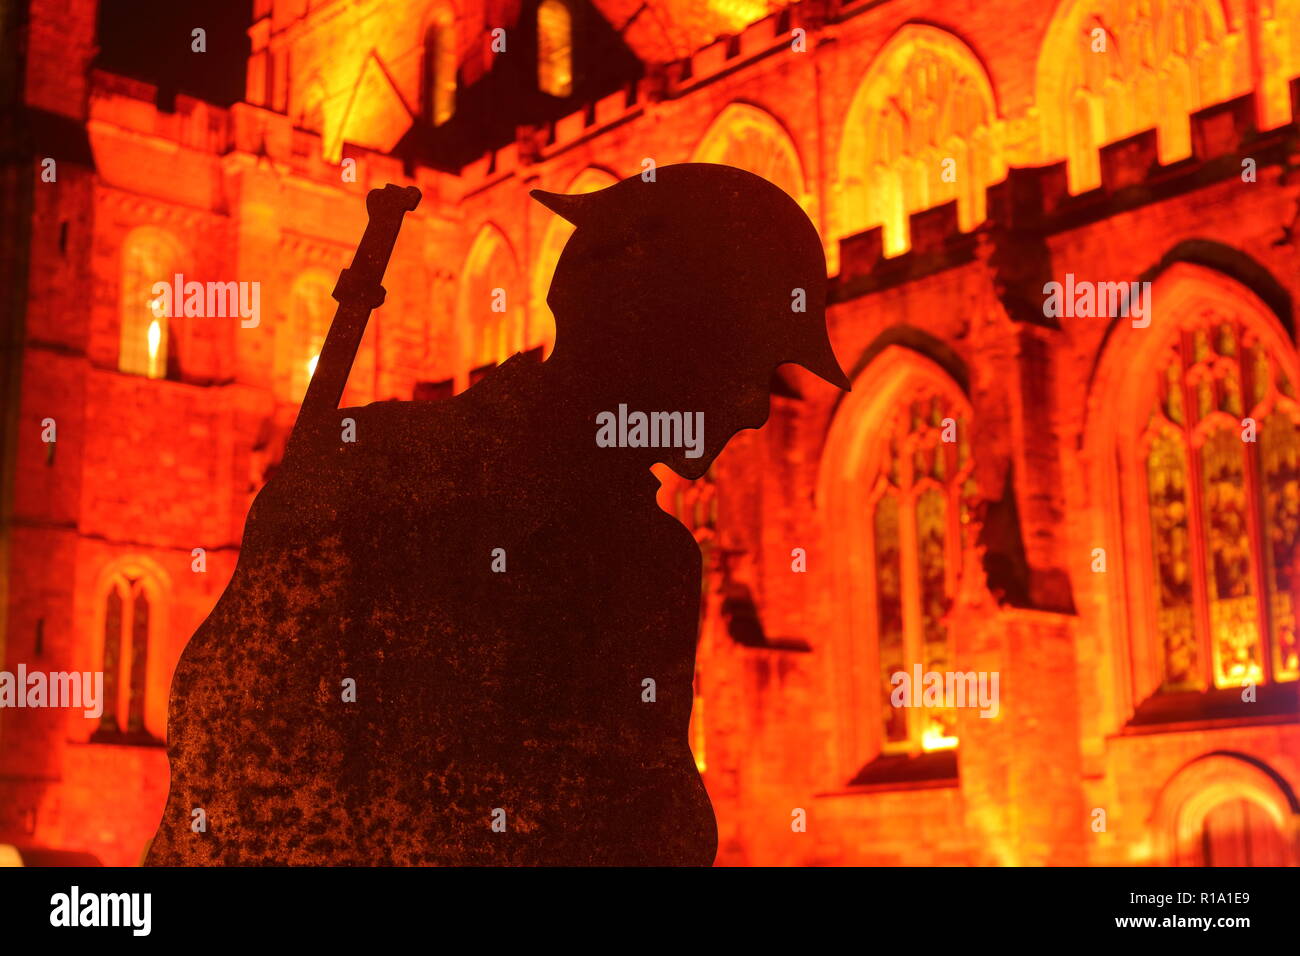 Ripon, North Yorkshire. 10th November2018. Soldier silhouettes placed opposite Ripon Cathedral to mark armistice day 2018. The Cathedral was also lit up in red around the back and sides, while the front was lit by animated projection. Credit: Yorkshire Pics/Alamy Live News Stock Photo